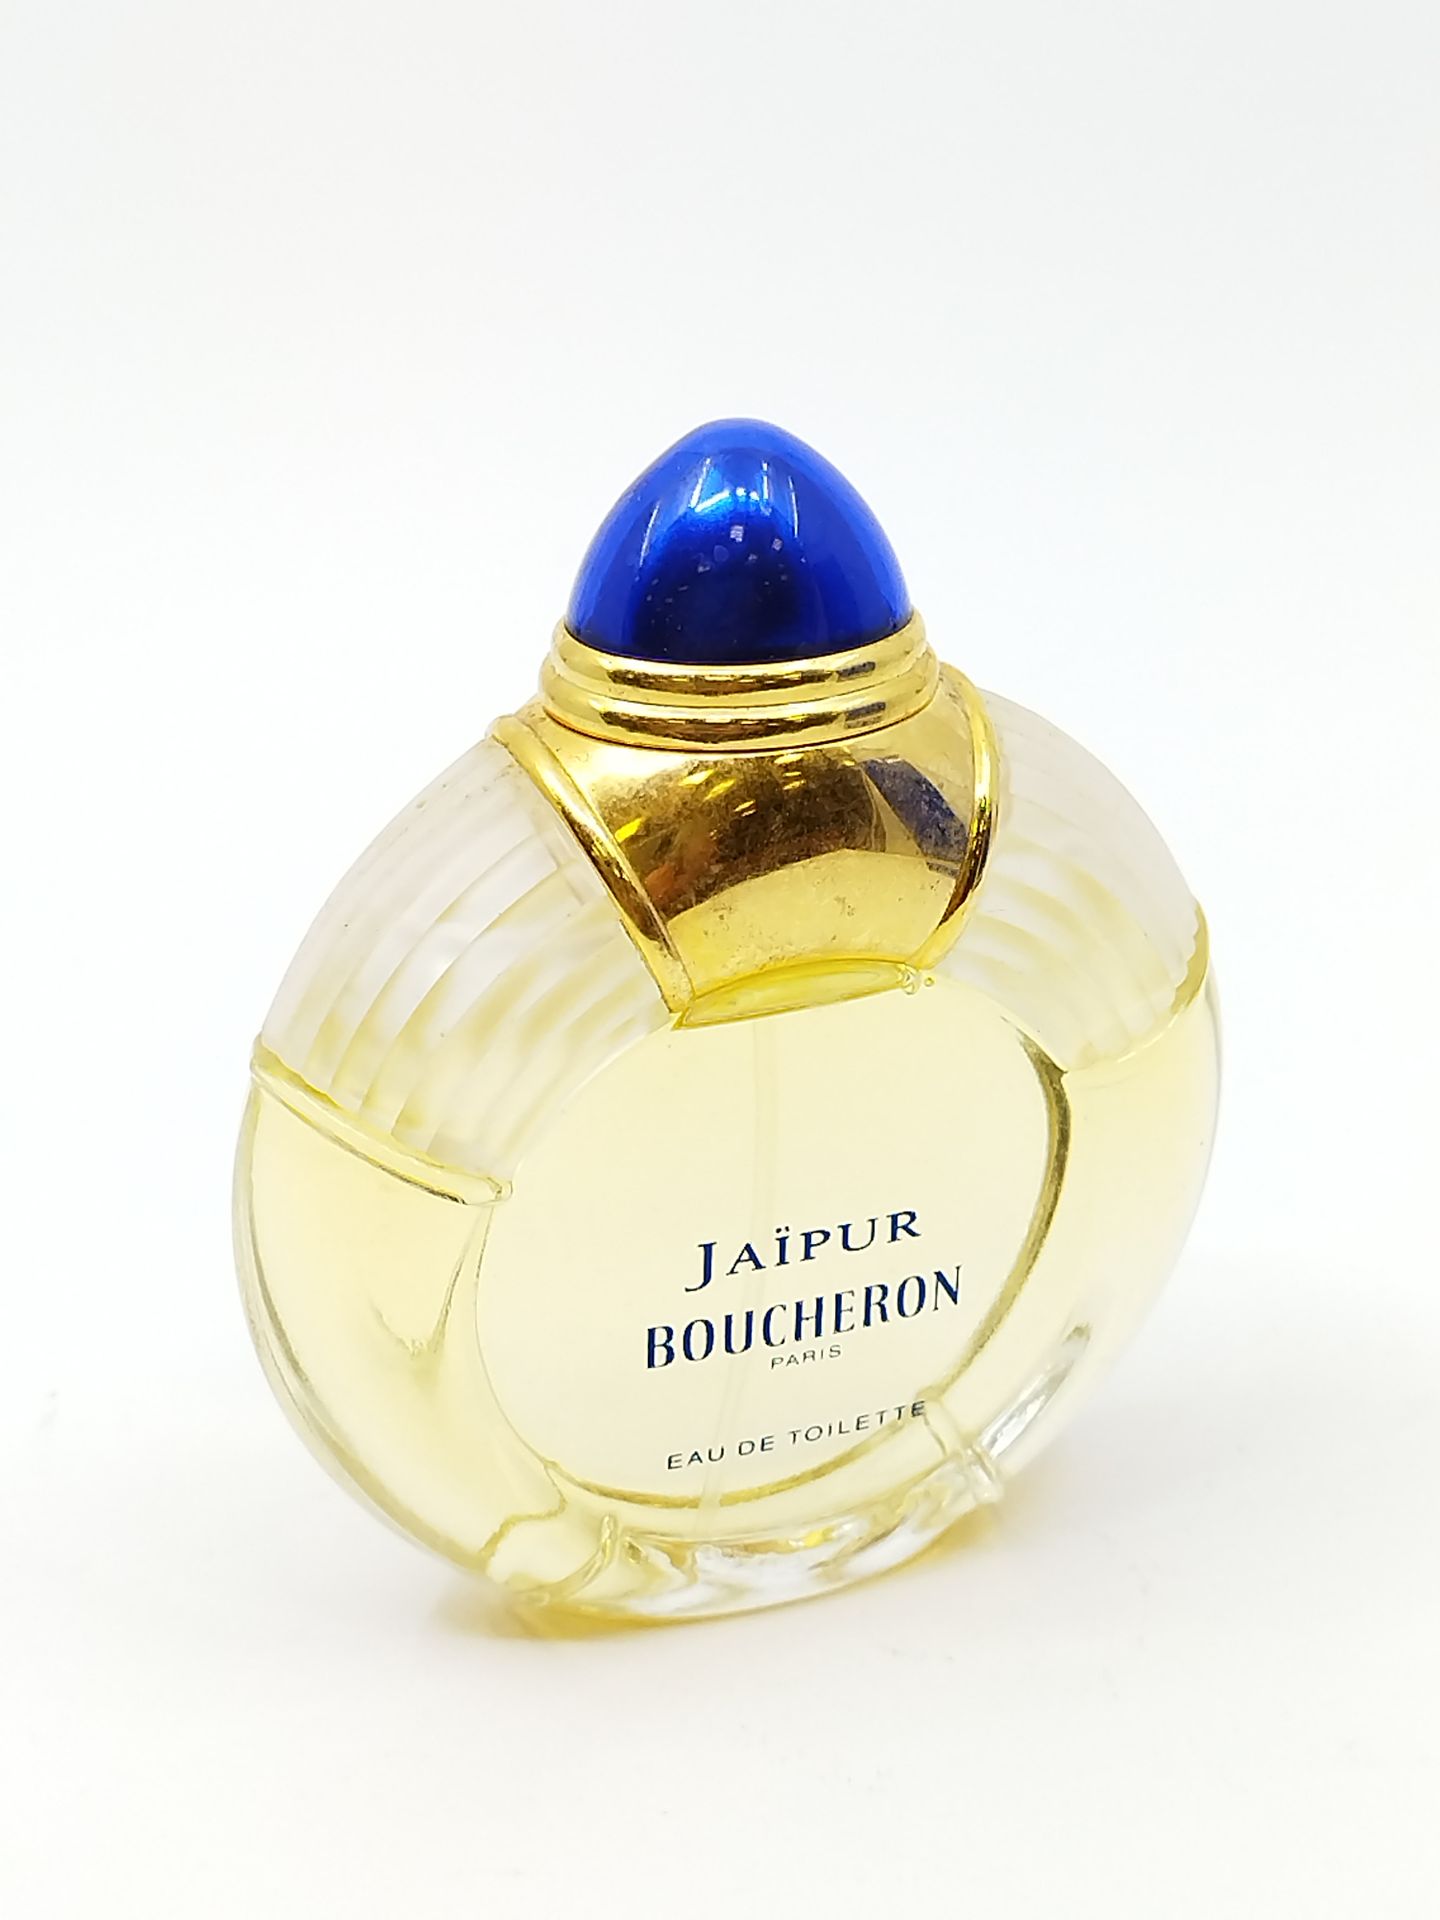 Null BOUCHERON PARIS JAIPUR

Two jewelery perfume bottles in colorless glass and&hellip;